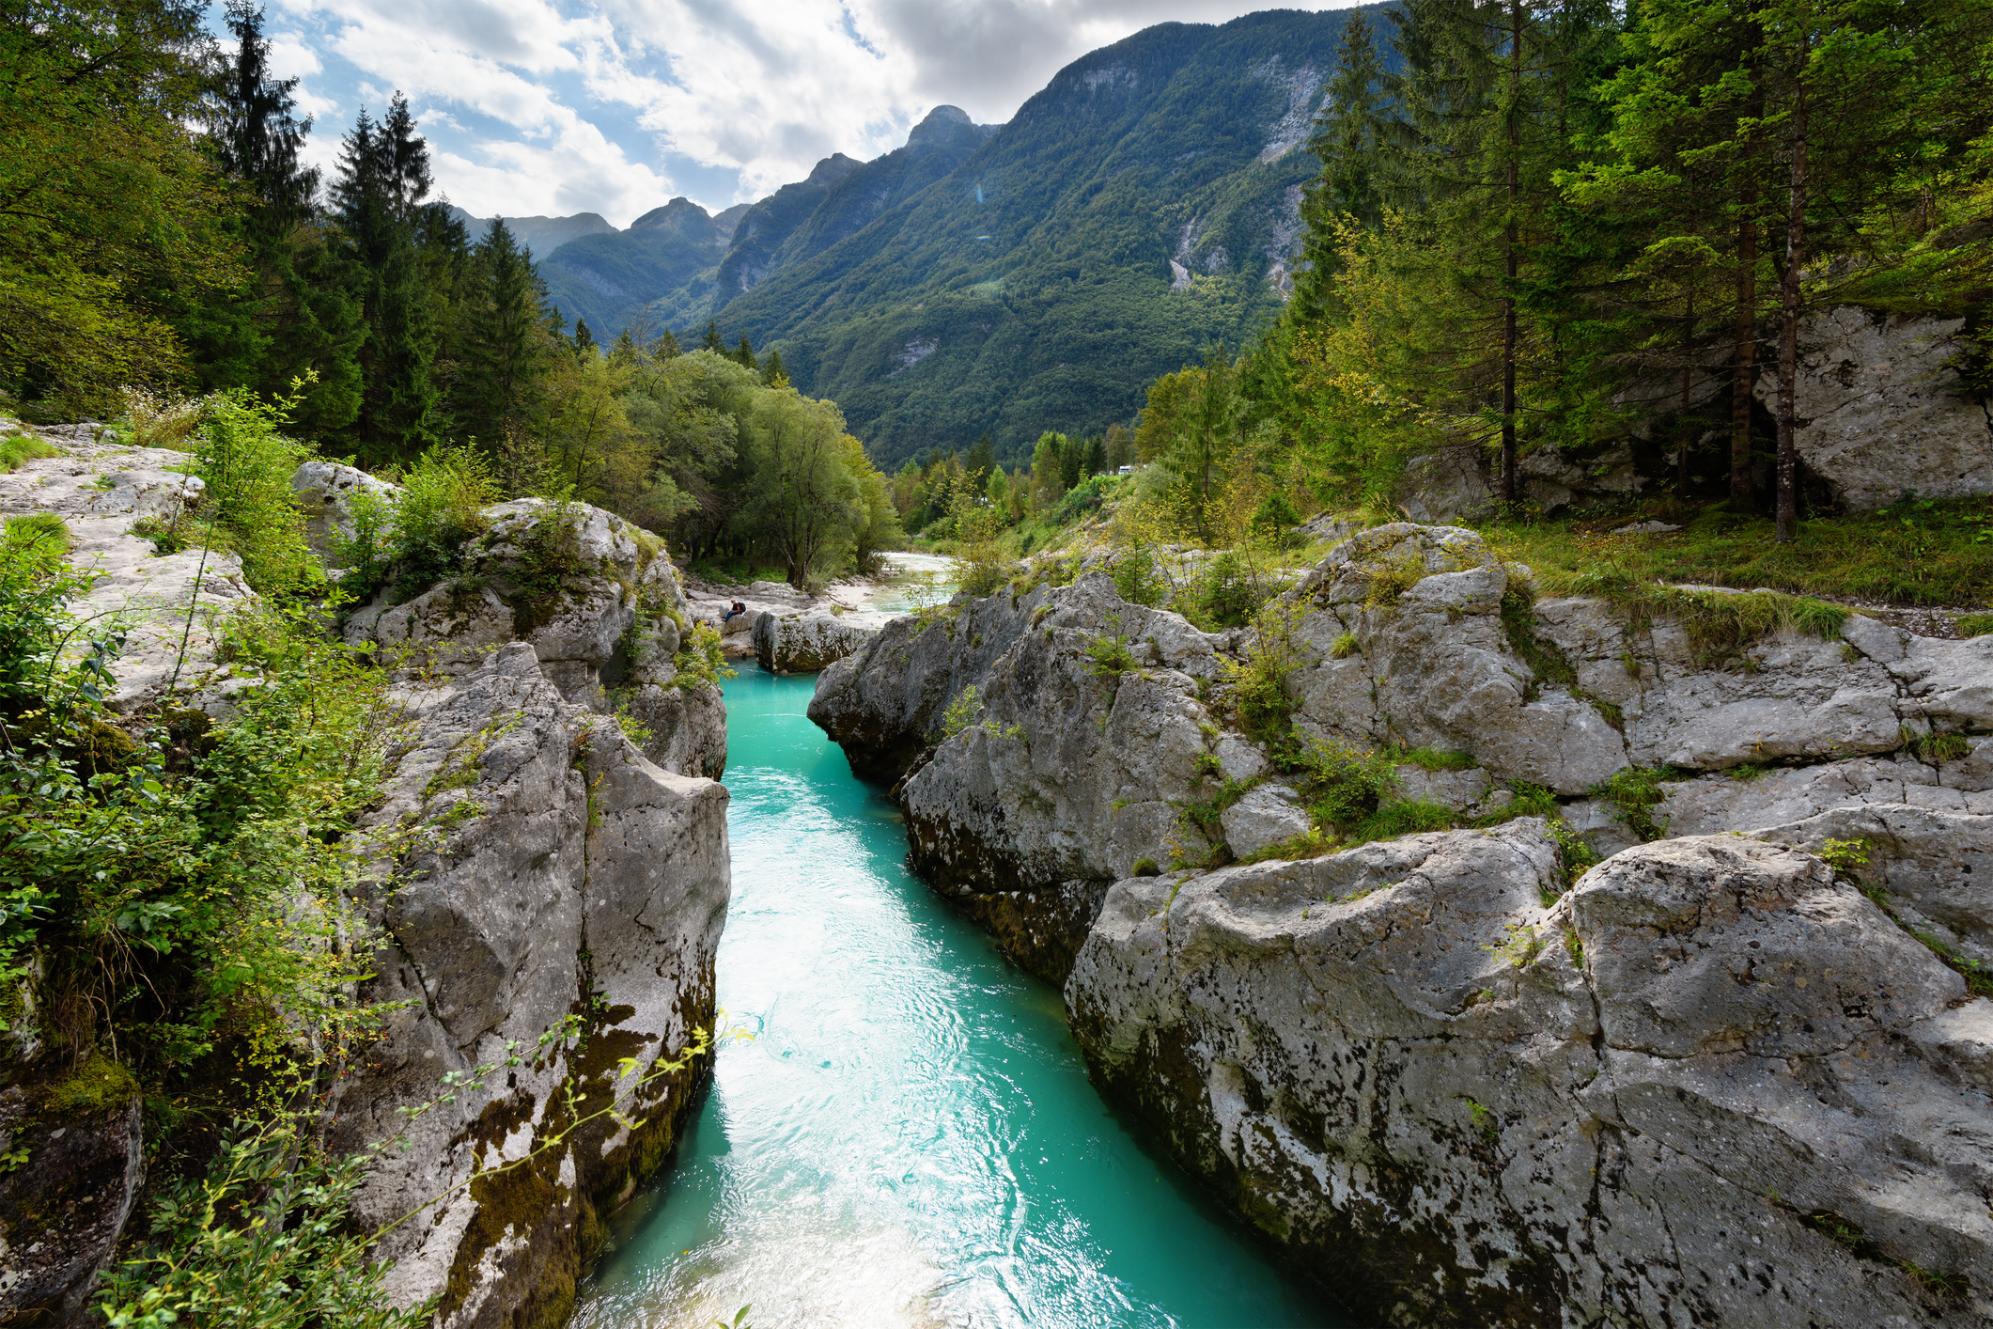 The fairytale surroundings of the Great Soča Gorge. Photo: Getty.